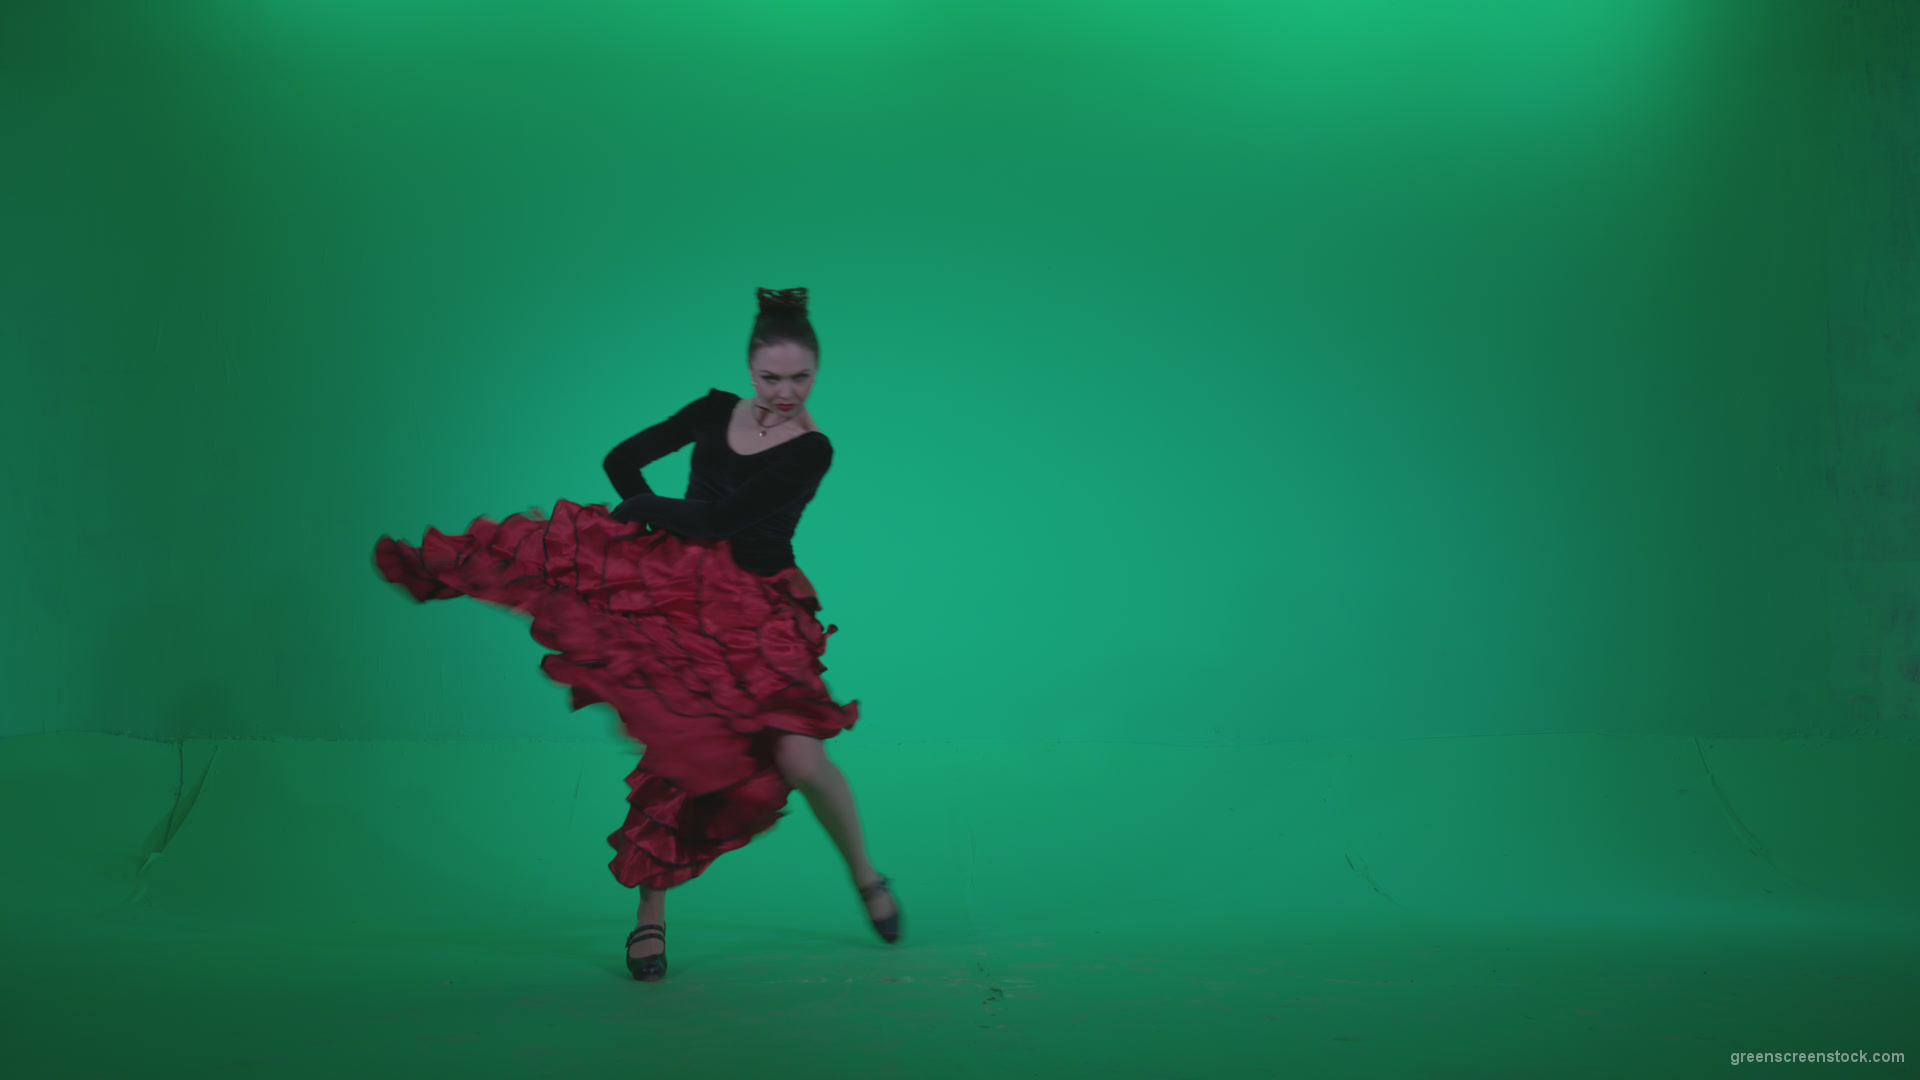 Flamenco-Red-and-Black-Dress-rb5-Green-Screen-Video-Footage_005 Green Screen Stock